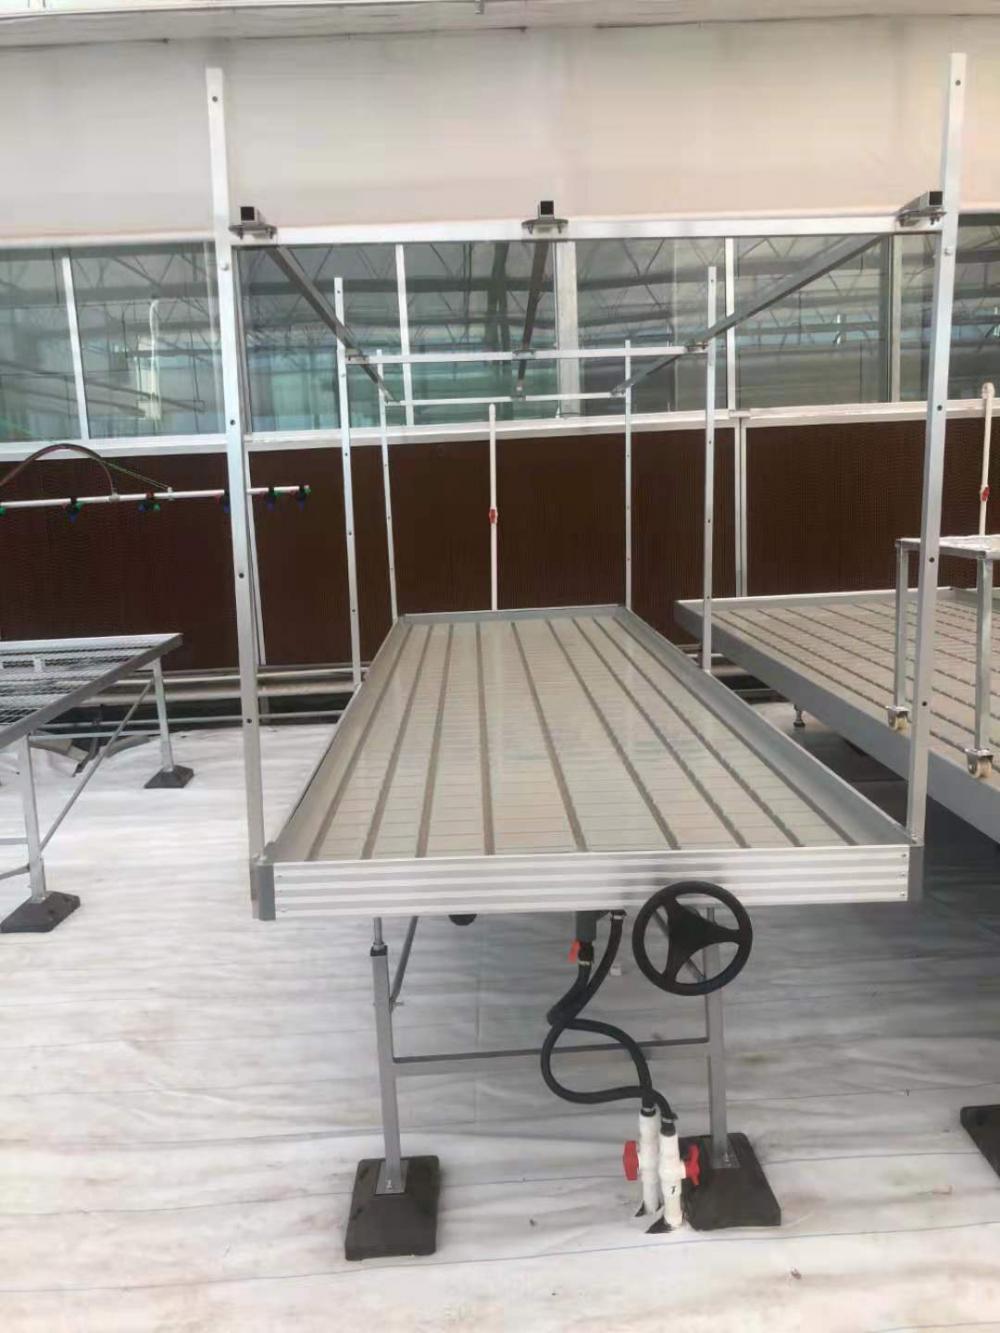 Skyplant Ebb Flow Rolling Bench in Greenhouse